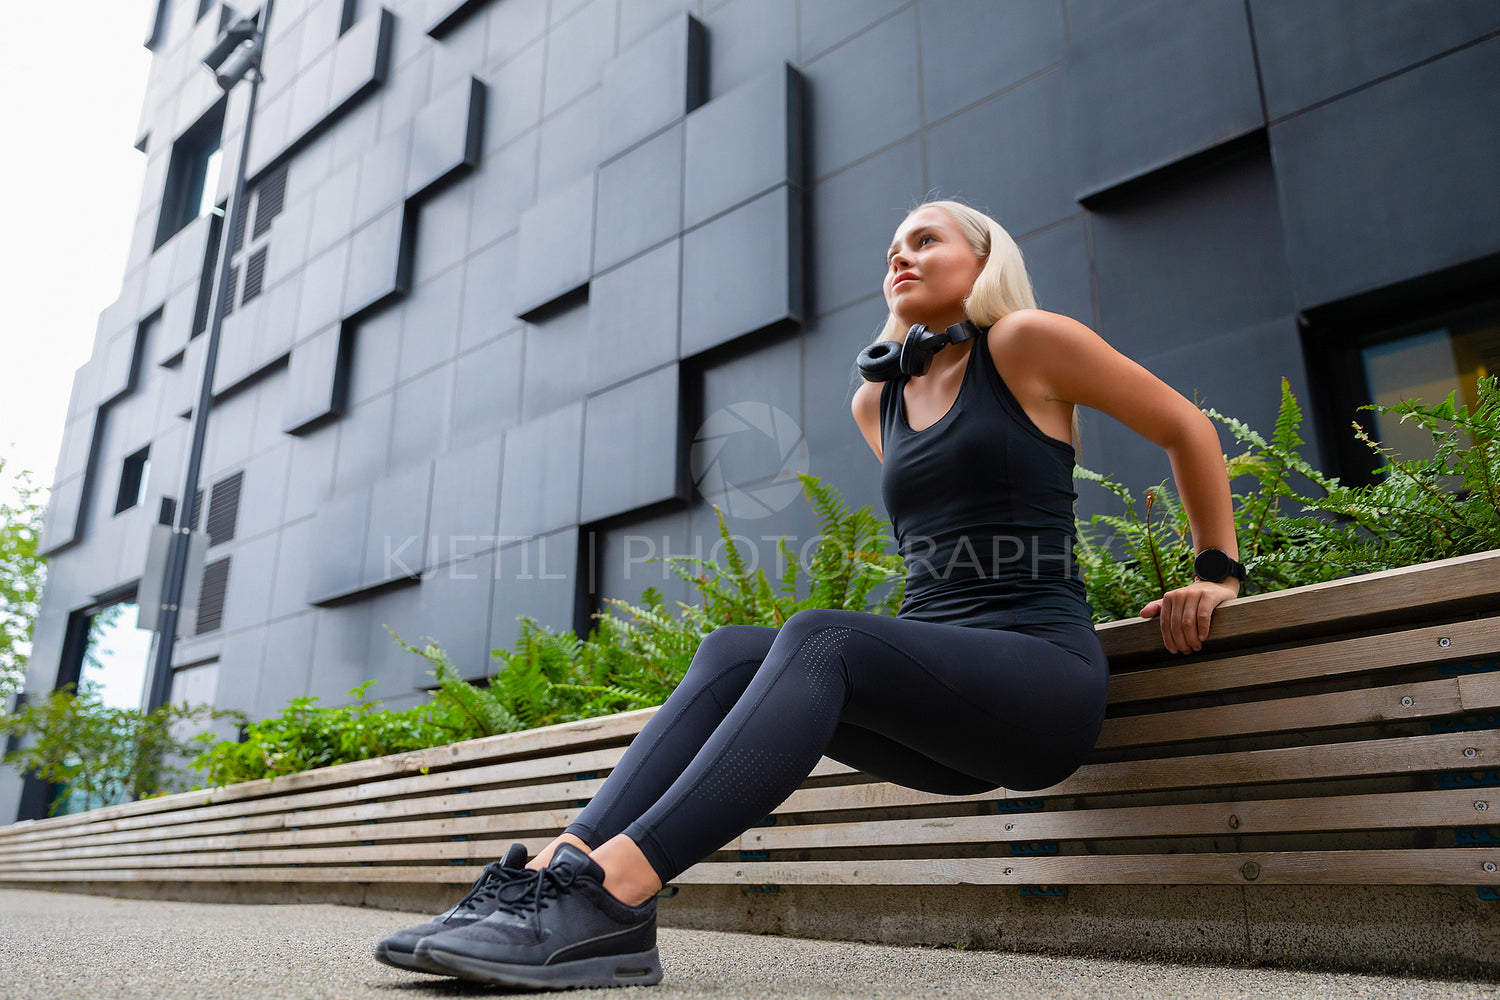 Focused Woman Doing Triceps Dips Outdoor in the City